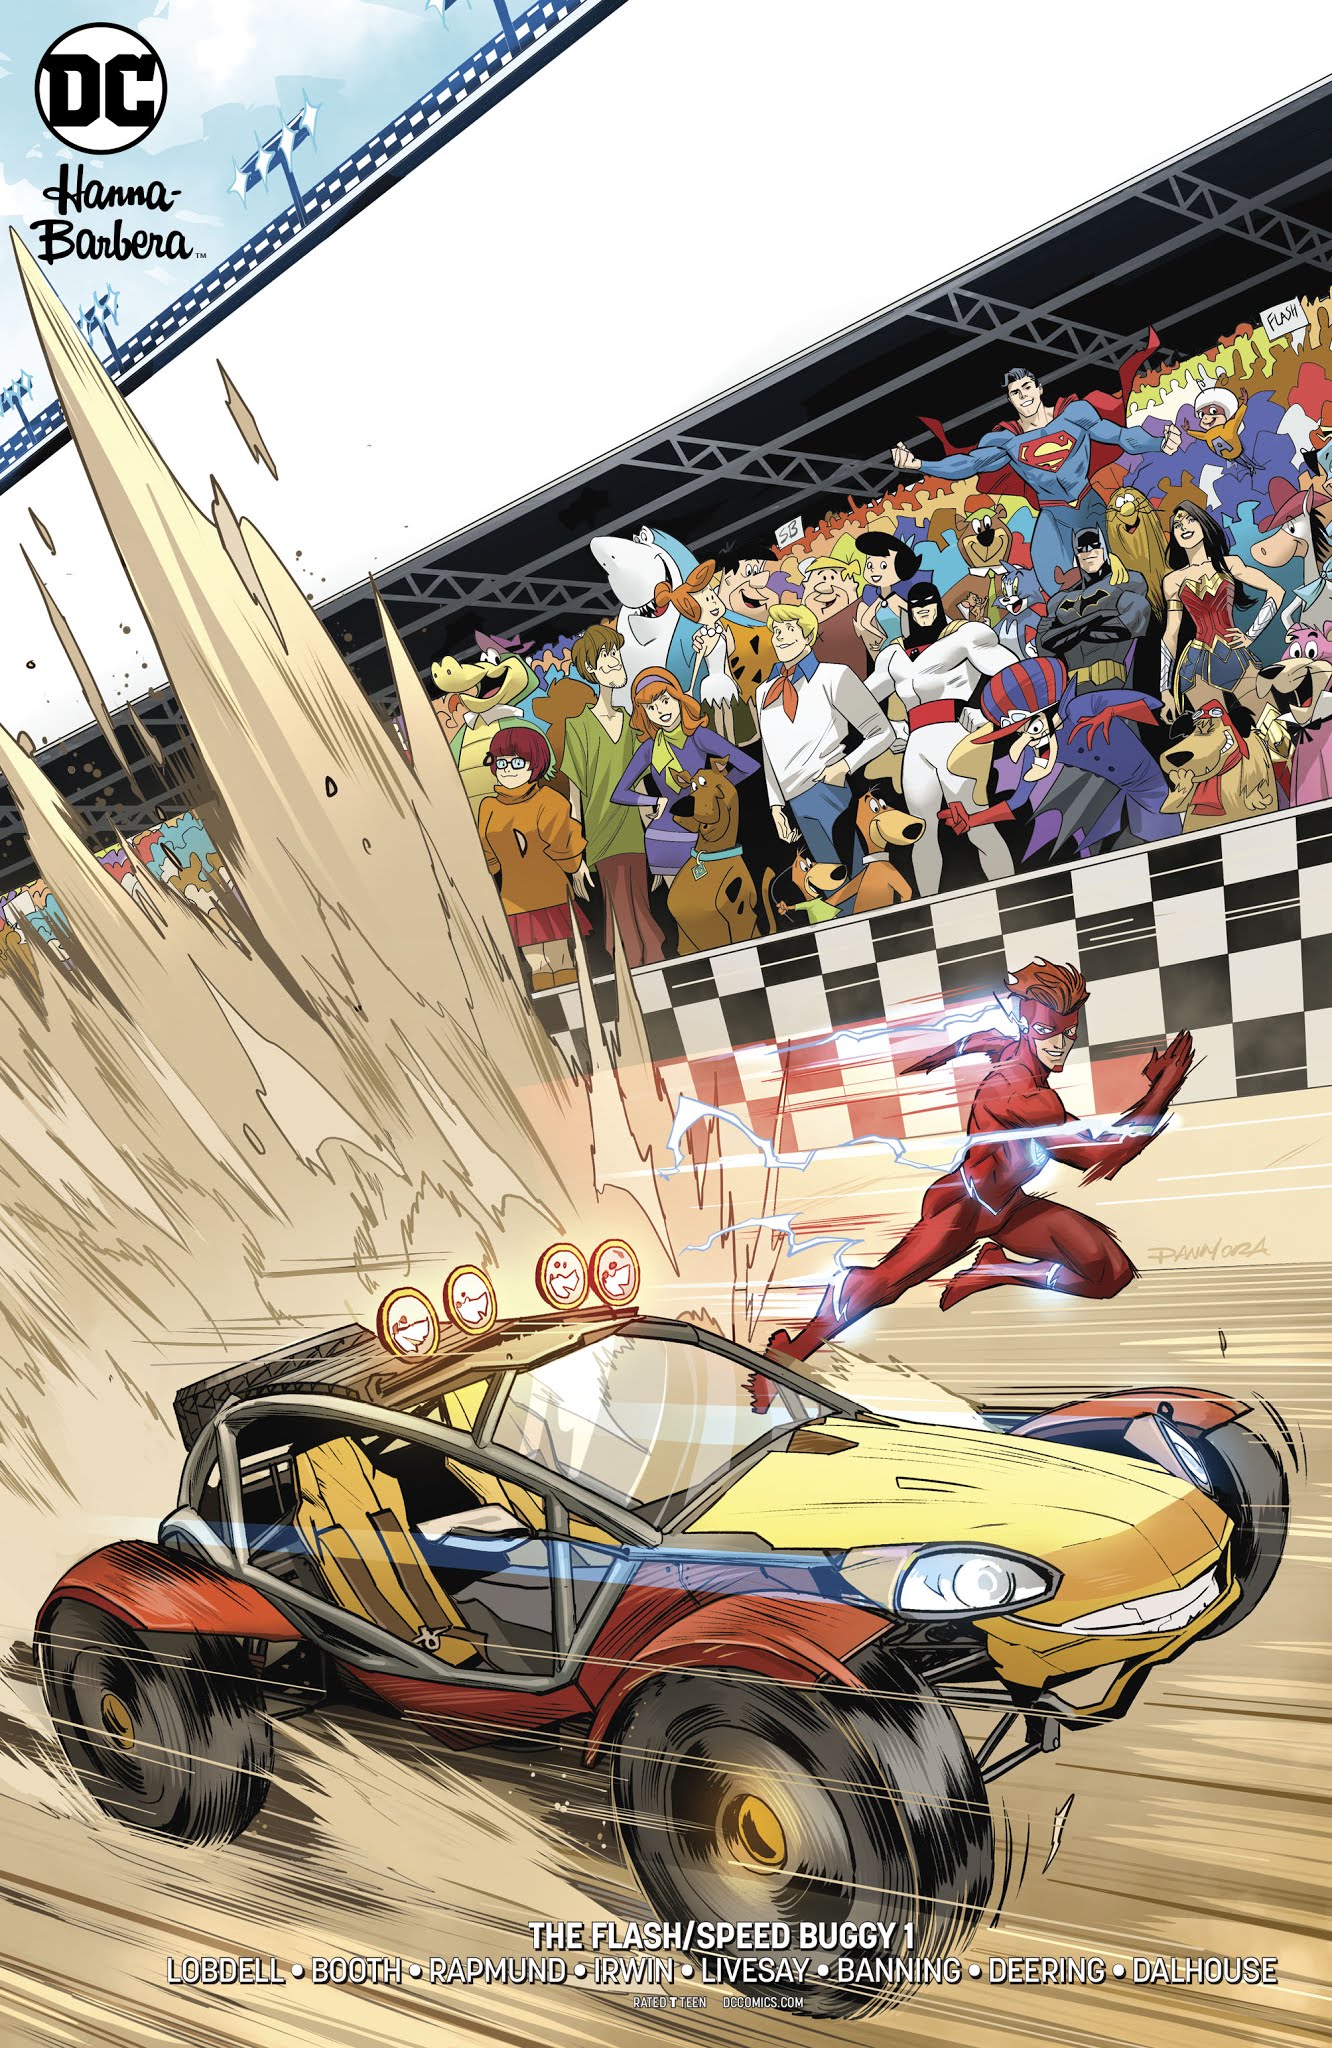 Read online DC Meets Hanna-Barbera comic -  Issue # Issue Flash - Speed Buggy - 3